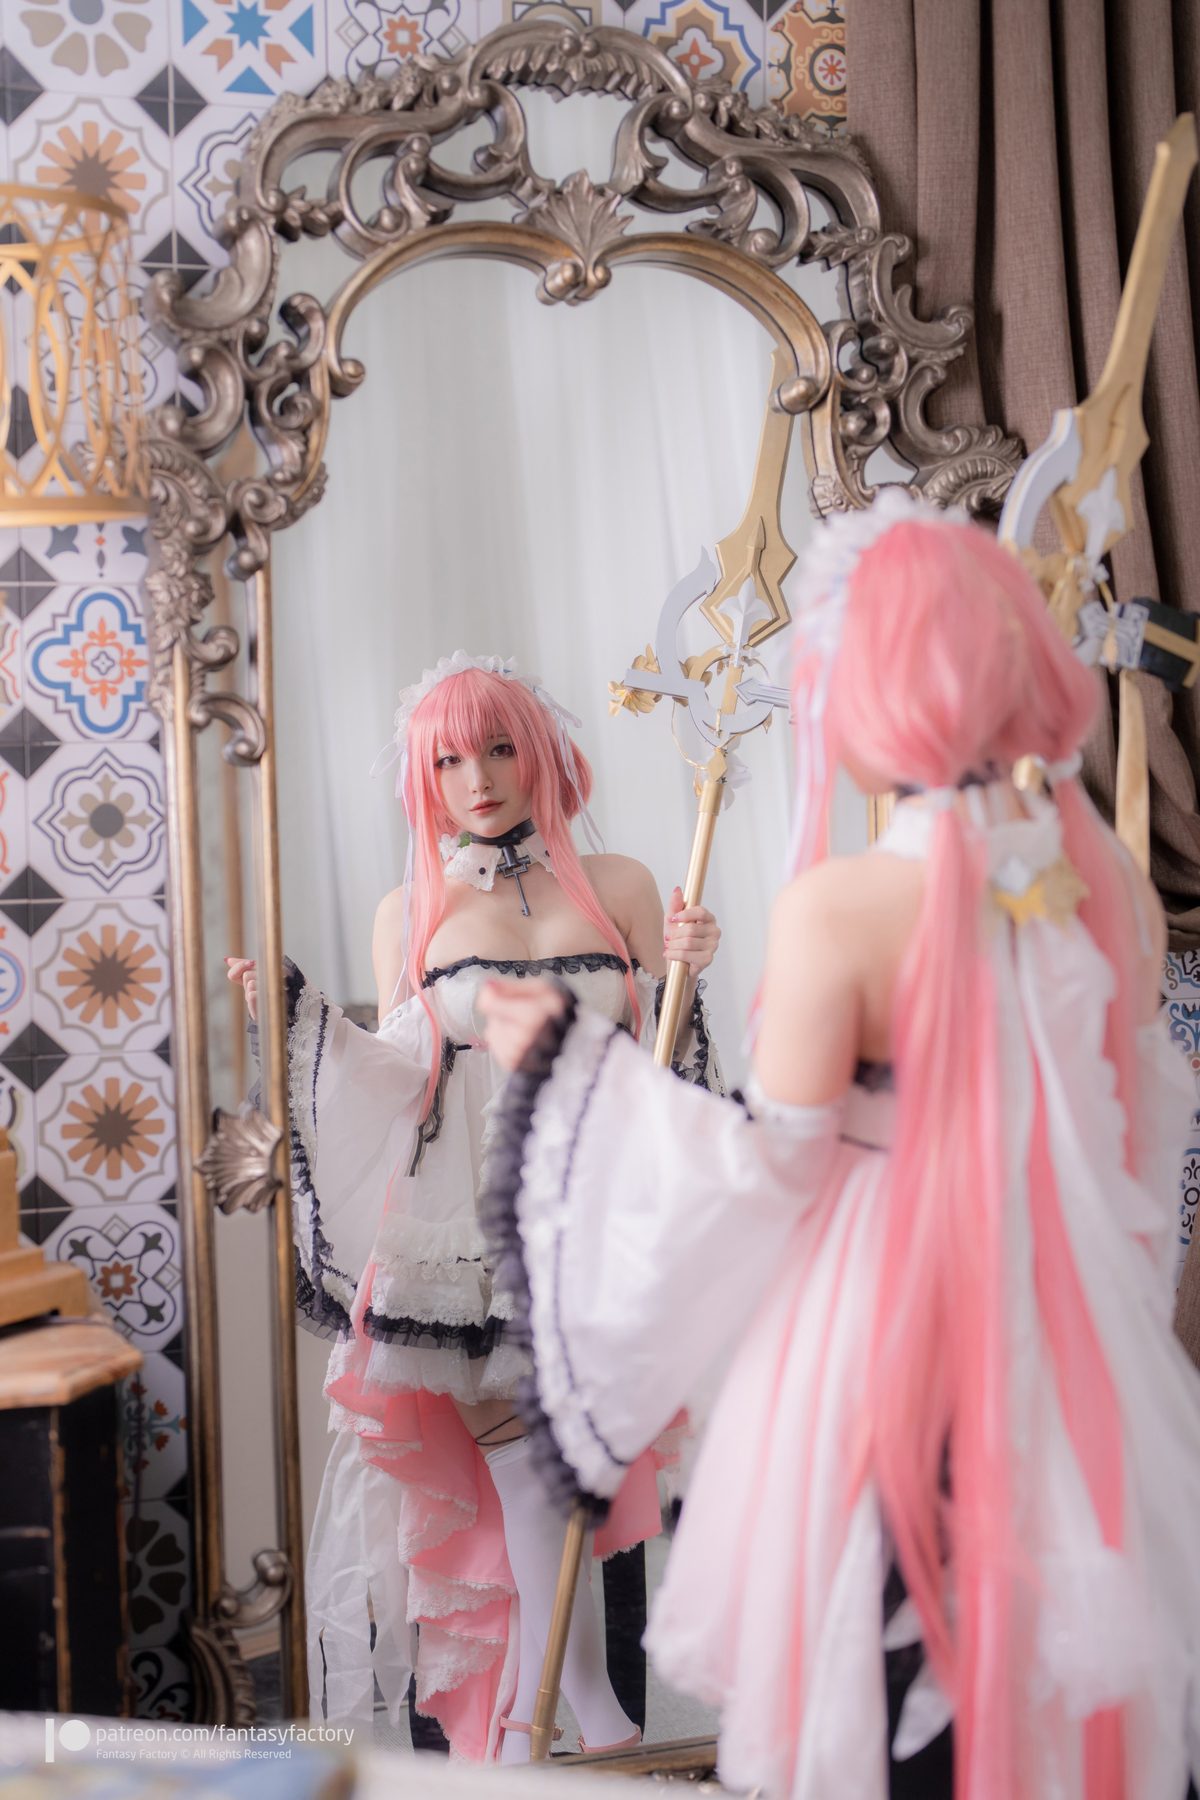 View - Fantasy Factory 小丁 - Cosplay 2022.01 A - 